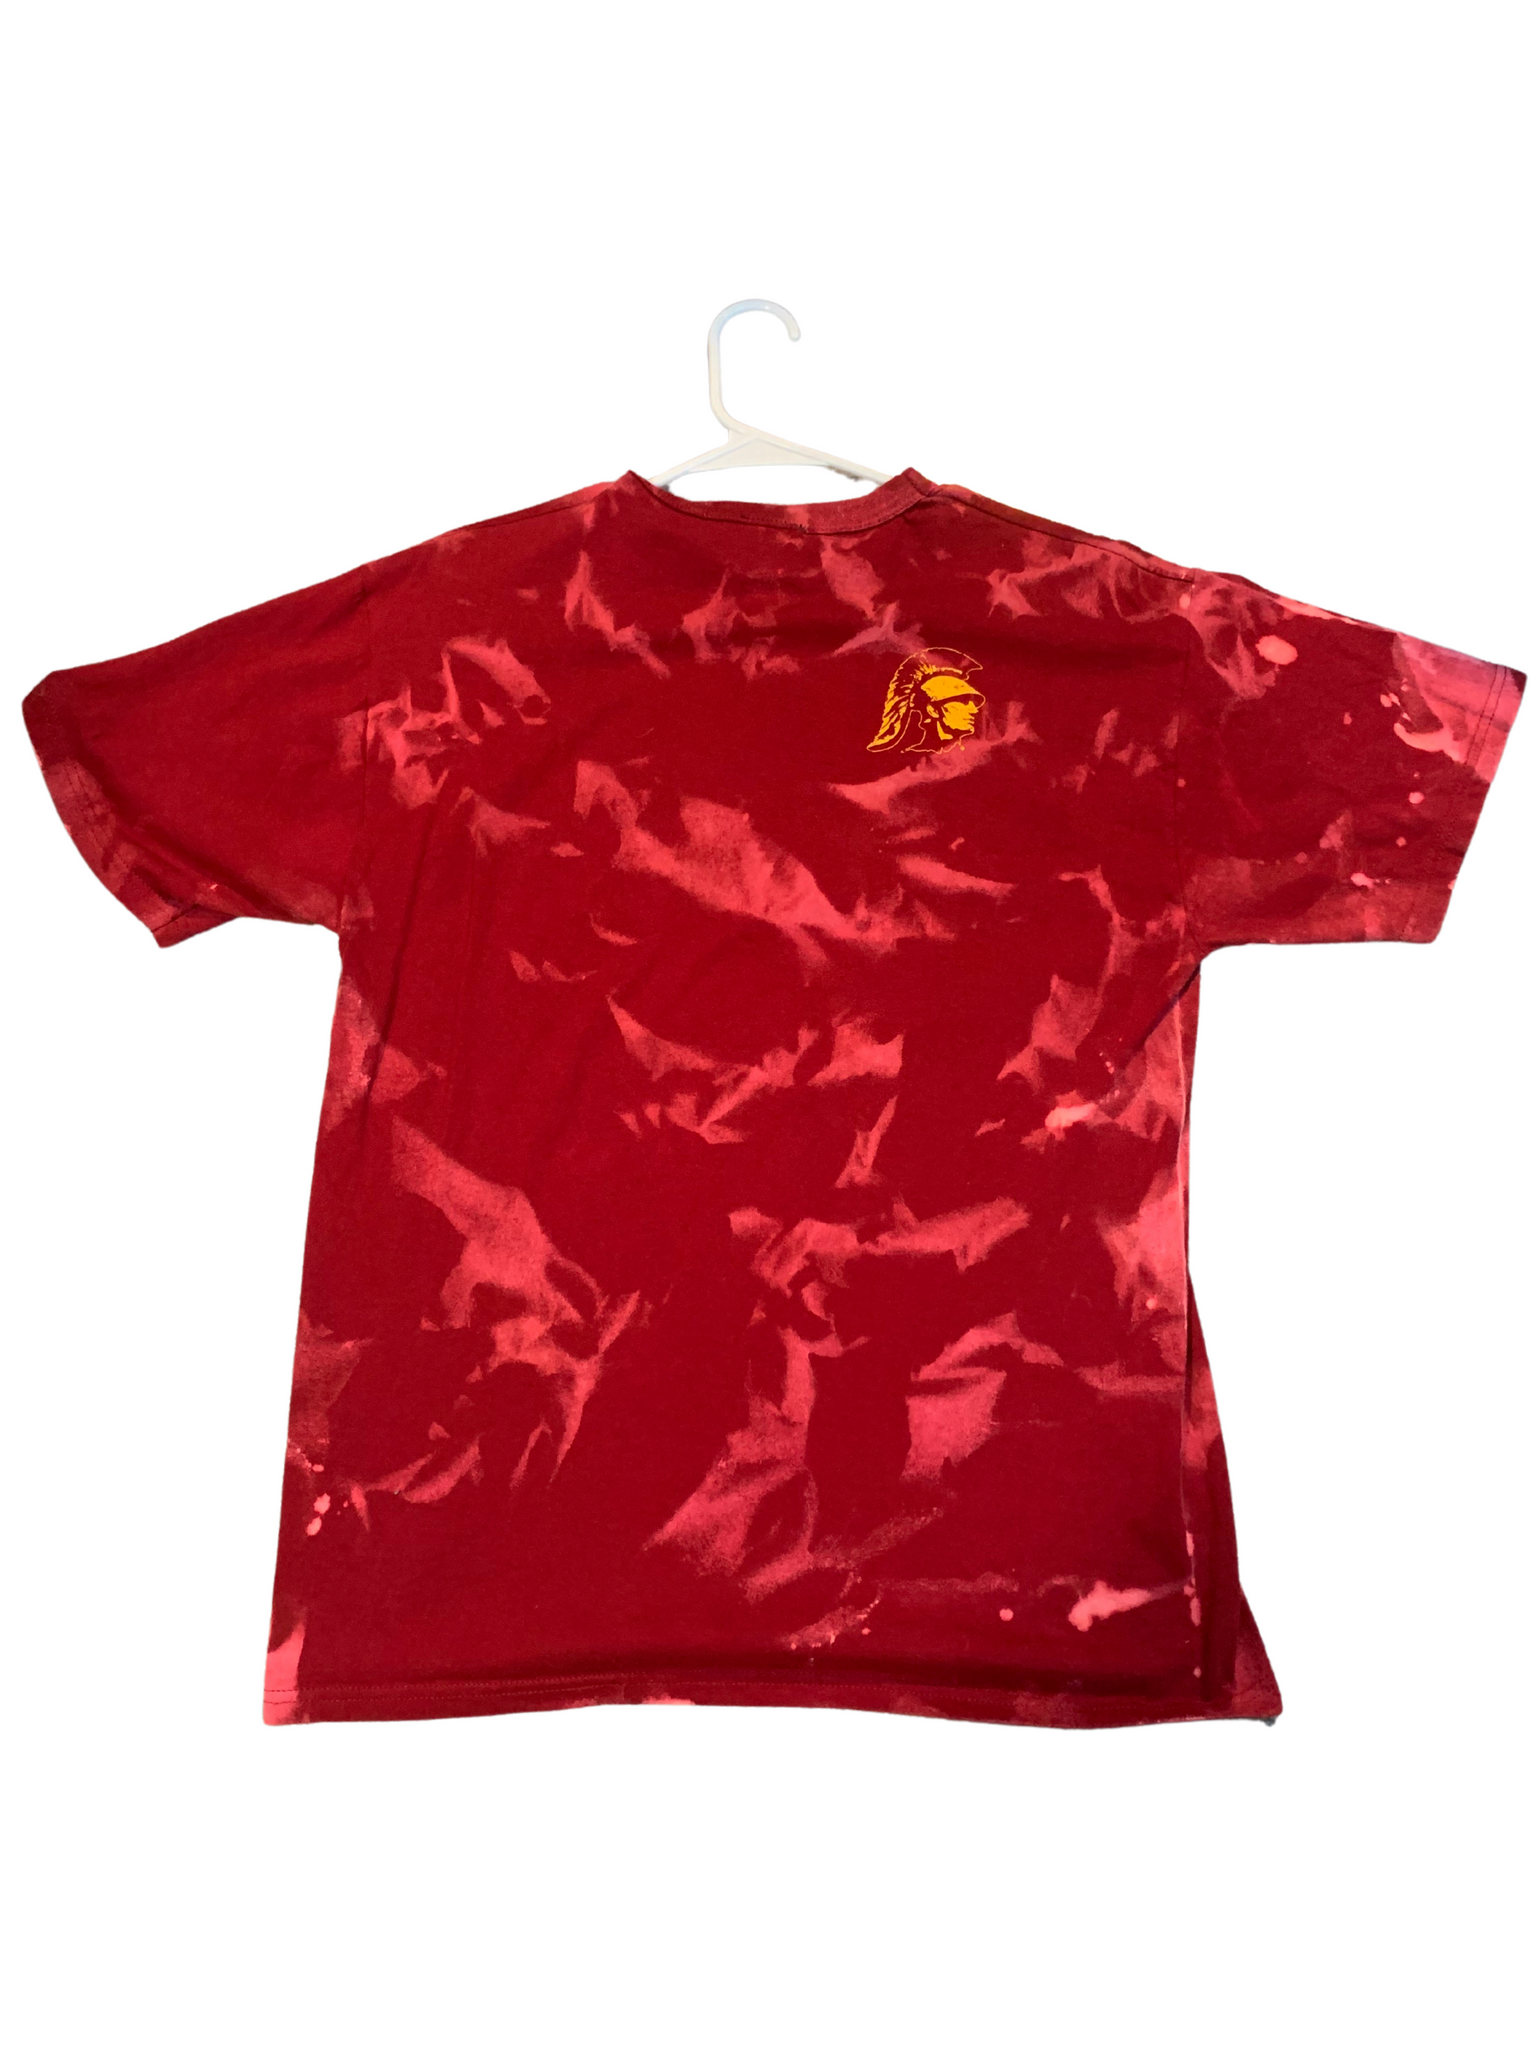 University of Southern California Bleached Shirt